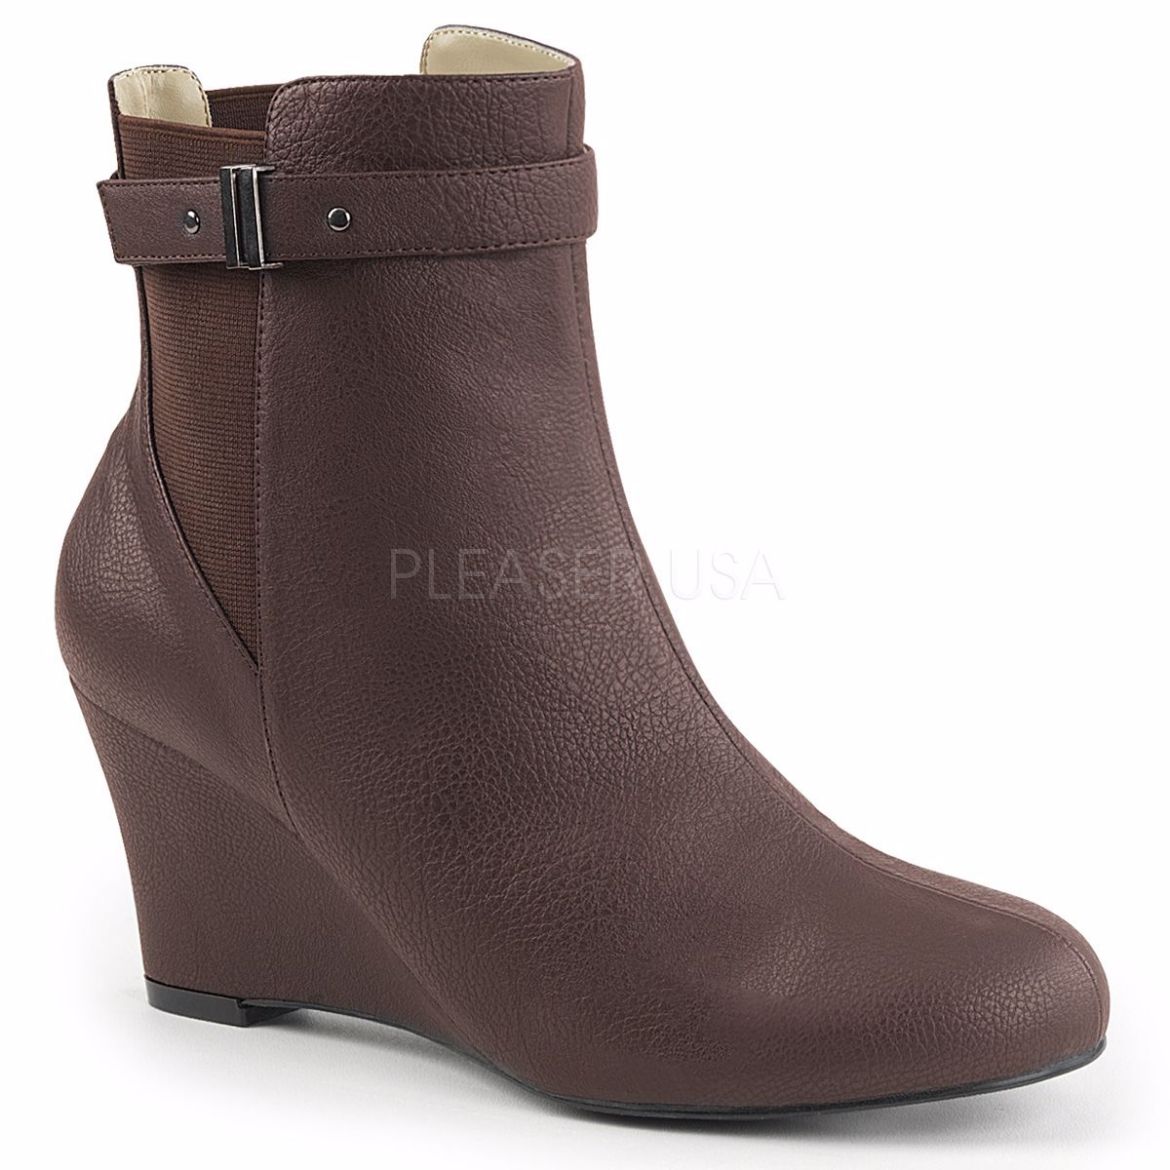 Product image of Pleaser Pink Label Kimberly-102 Brown Faux Leather, 3 inch (7.6 cm) Heel Ankle Boot